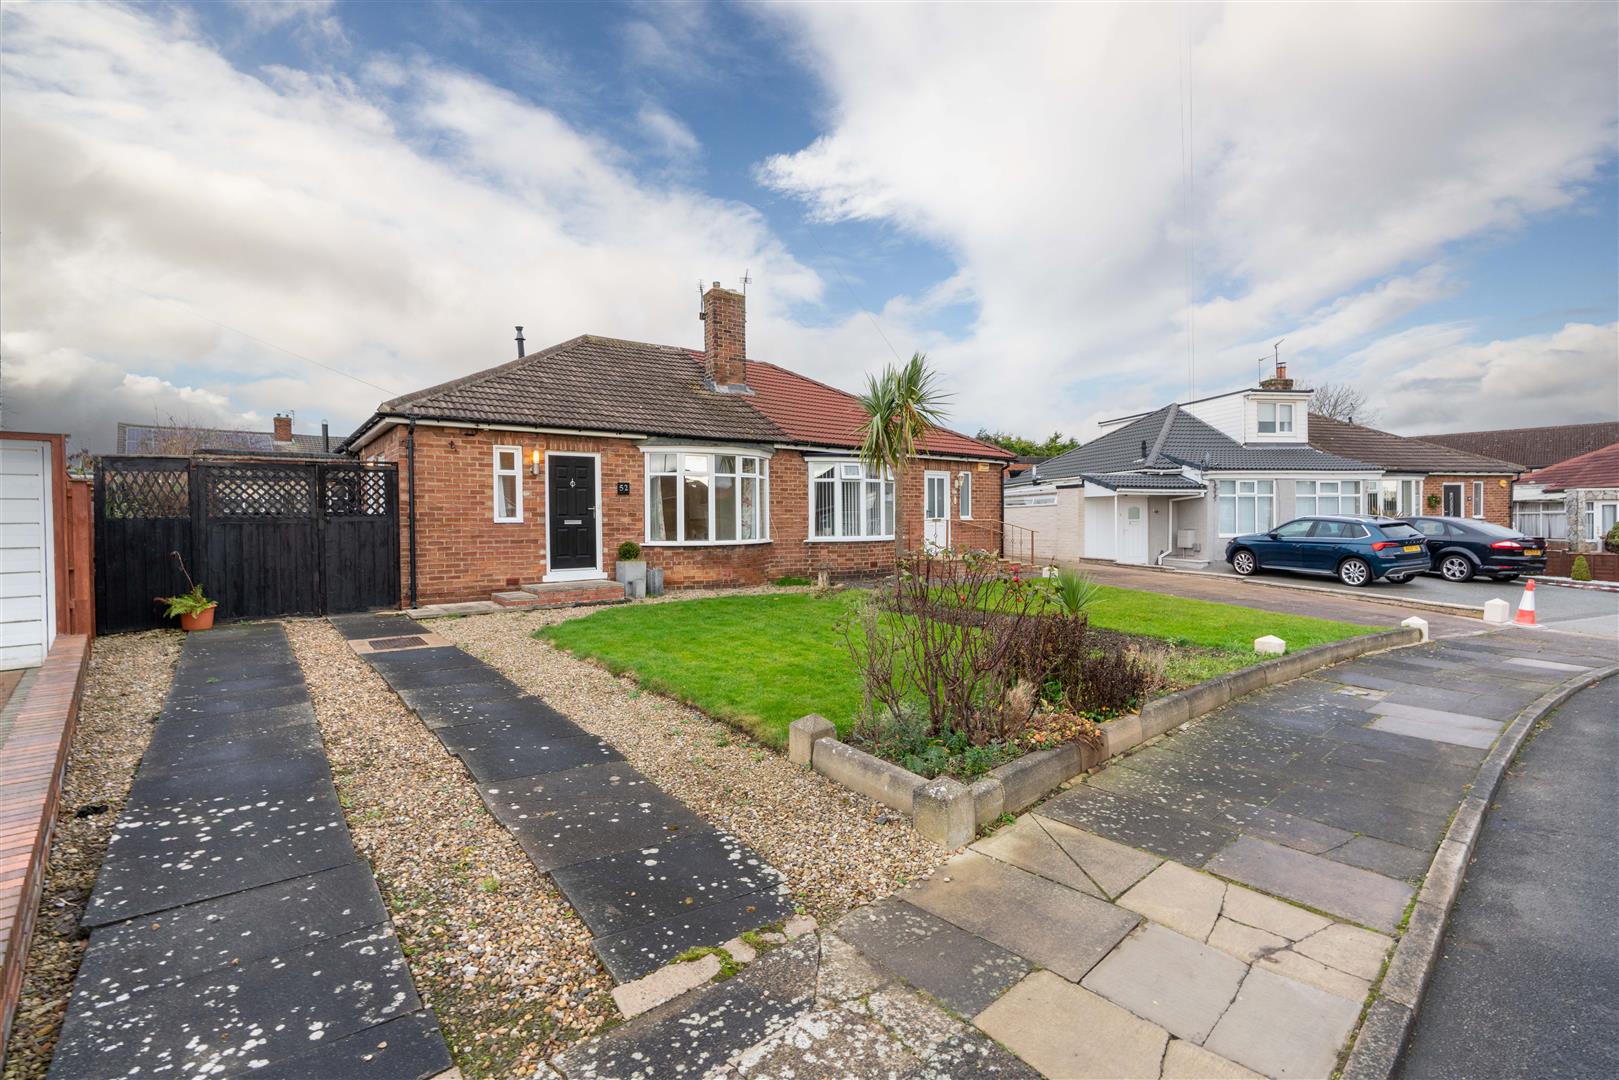 2 bed semi-detached bungalow for sale in Birchwood Avenue, North Gosforth - Property Image 1